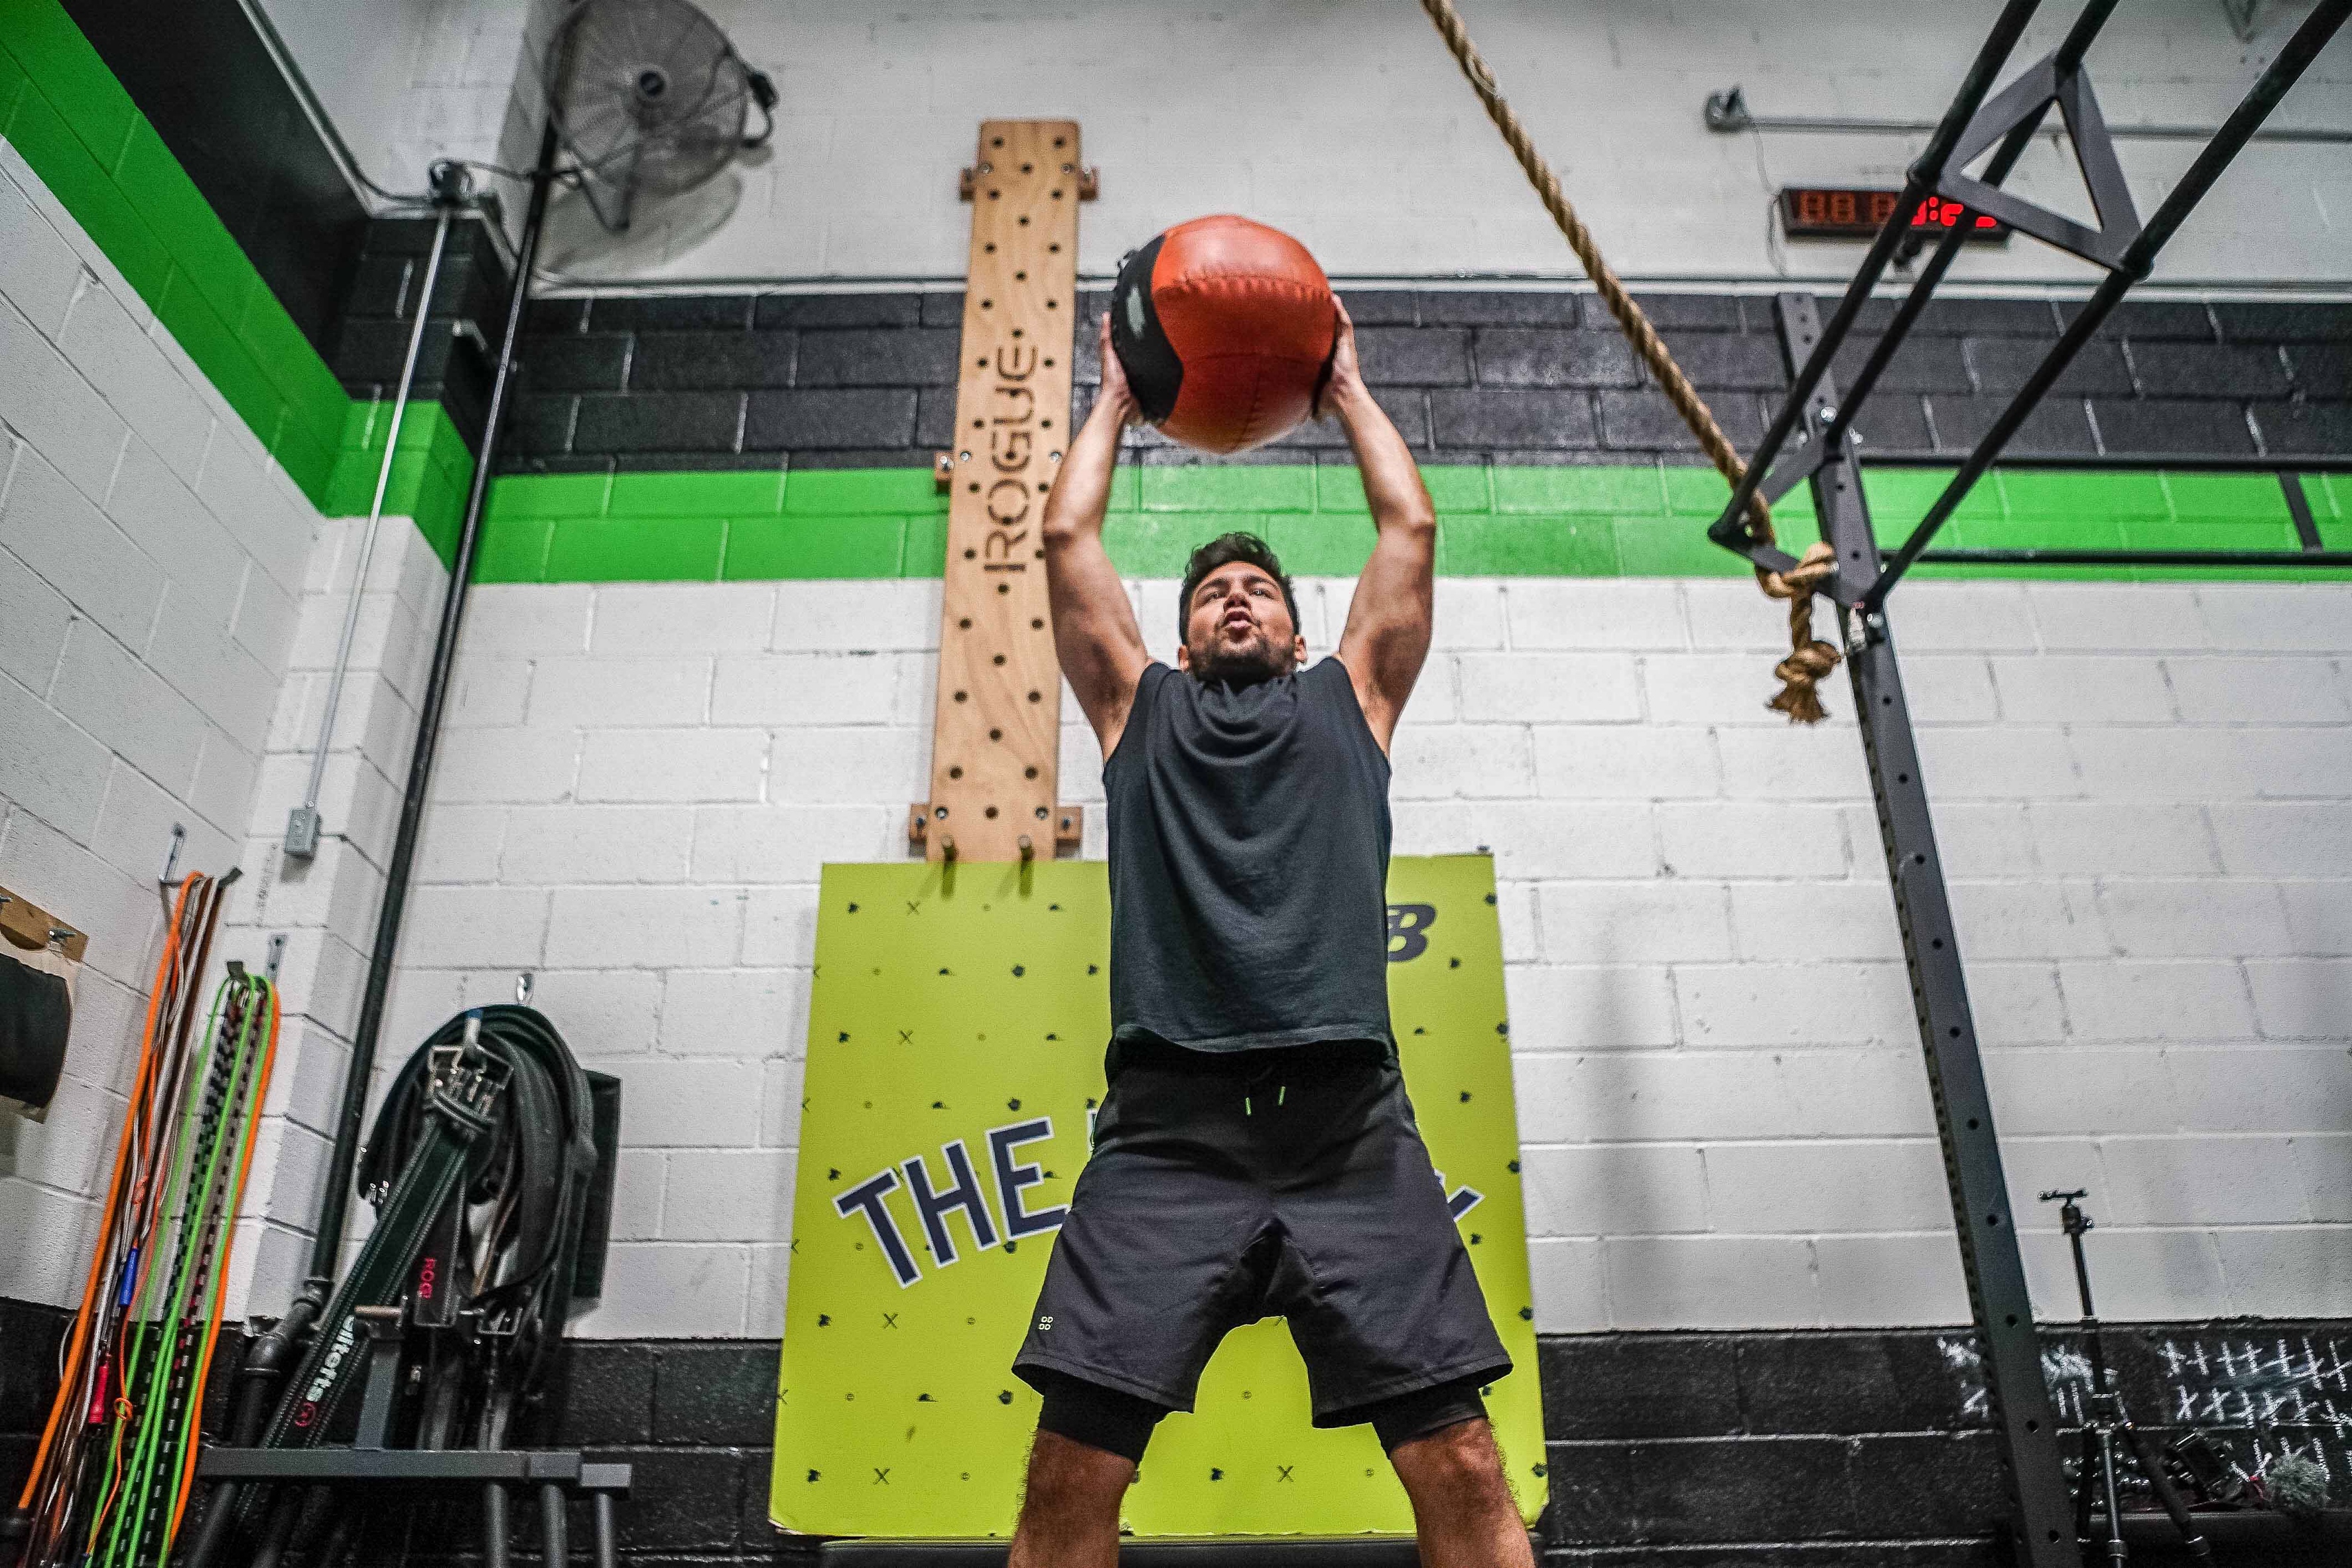 Crossfit in the bronx - dandy in the bronx